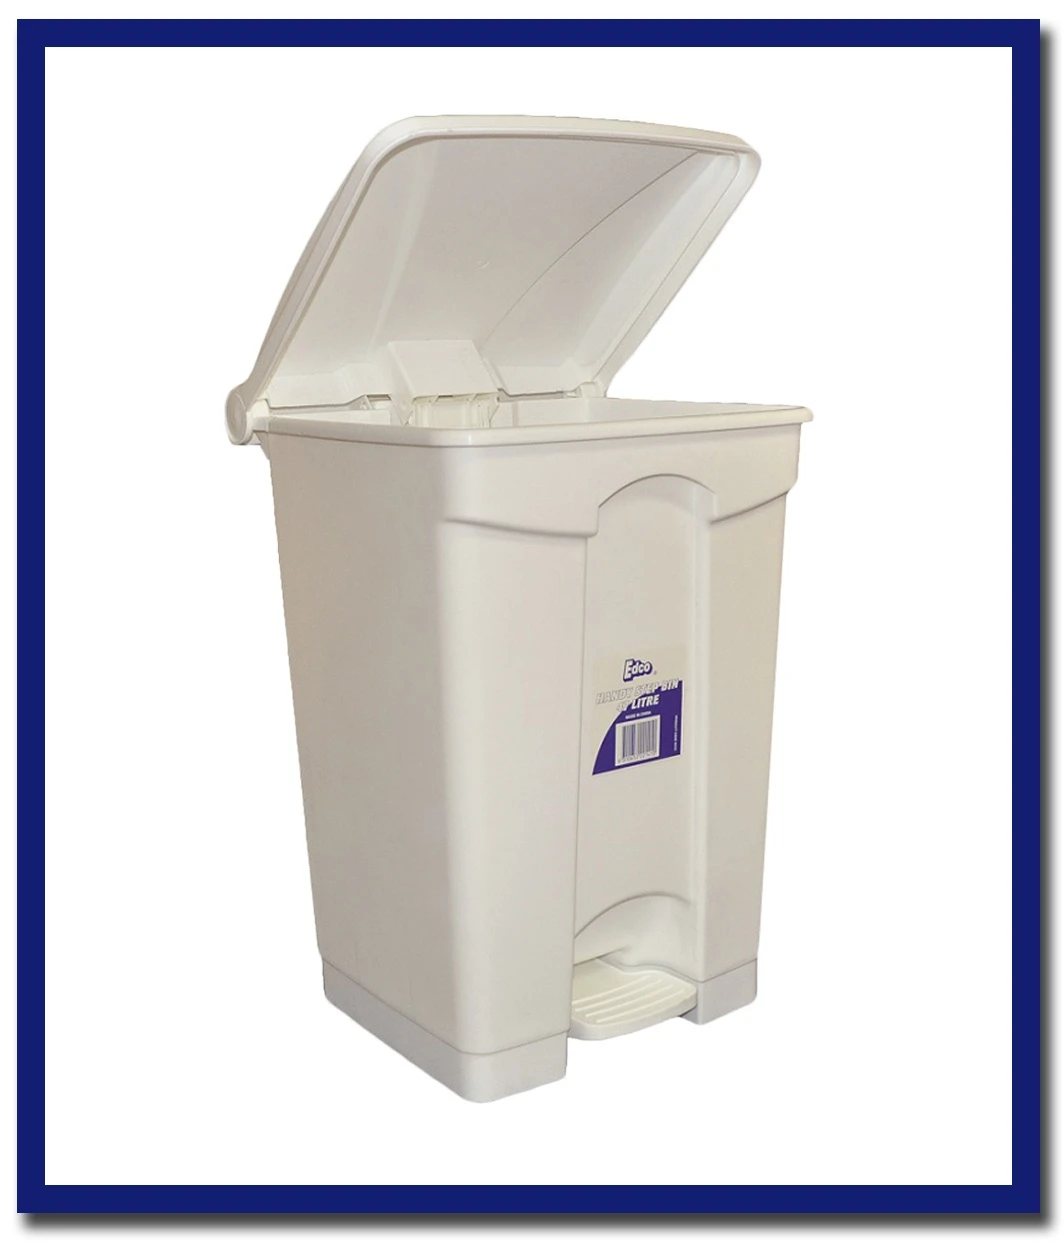 Edco Handy Step Bin With Pedal (Assembled) - 1 Unit - Stone Doctor Australia - Cleaning Accessories > Bins > Pedal Bins